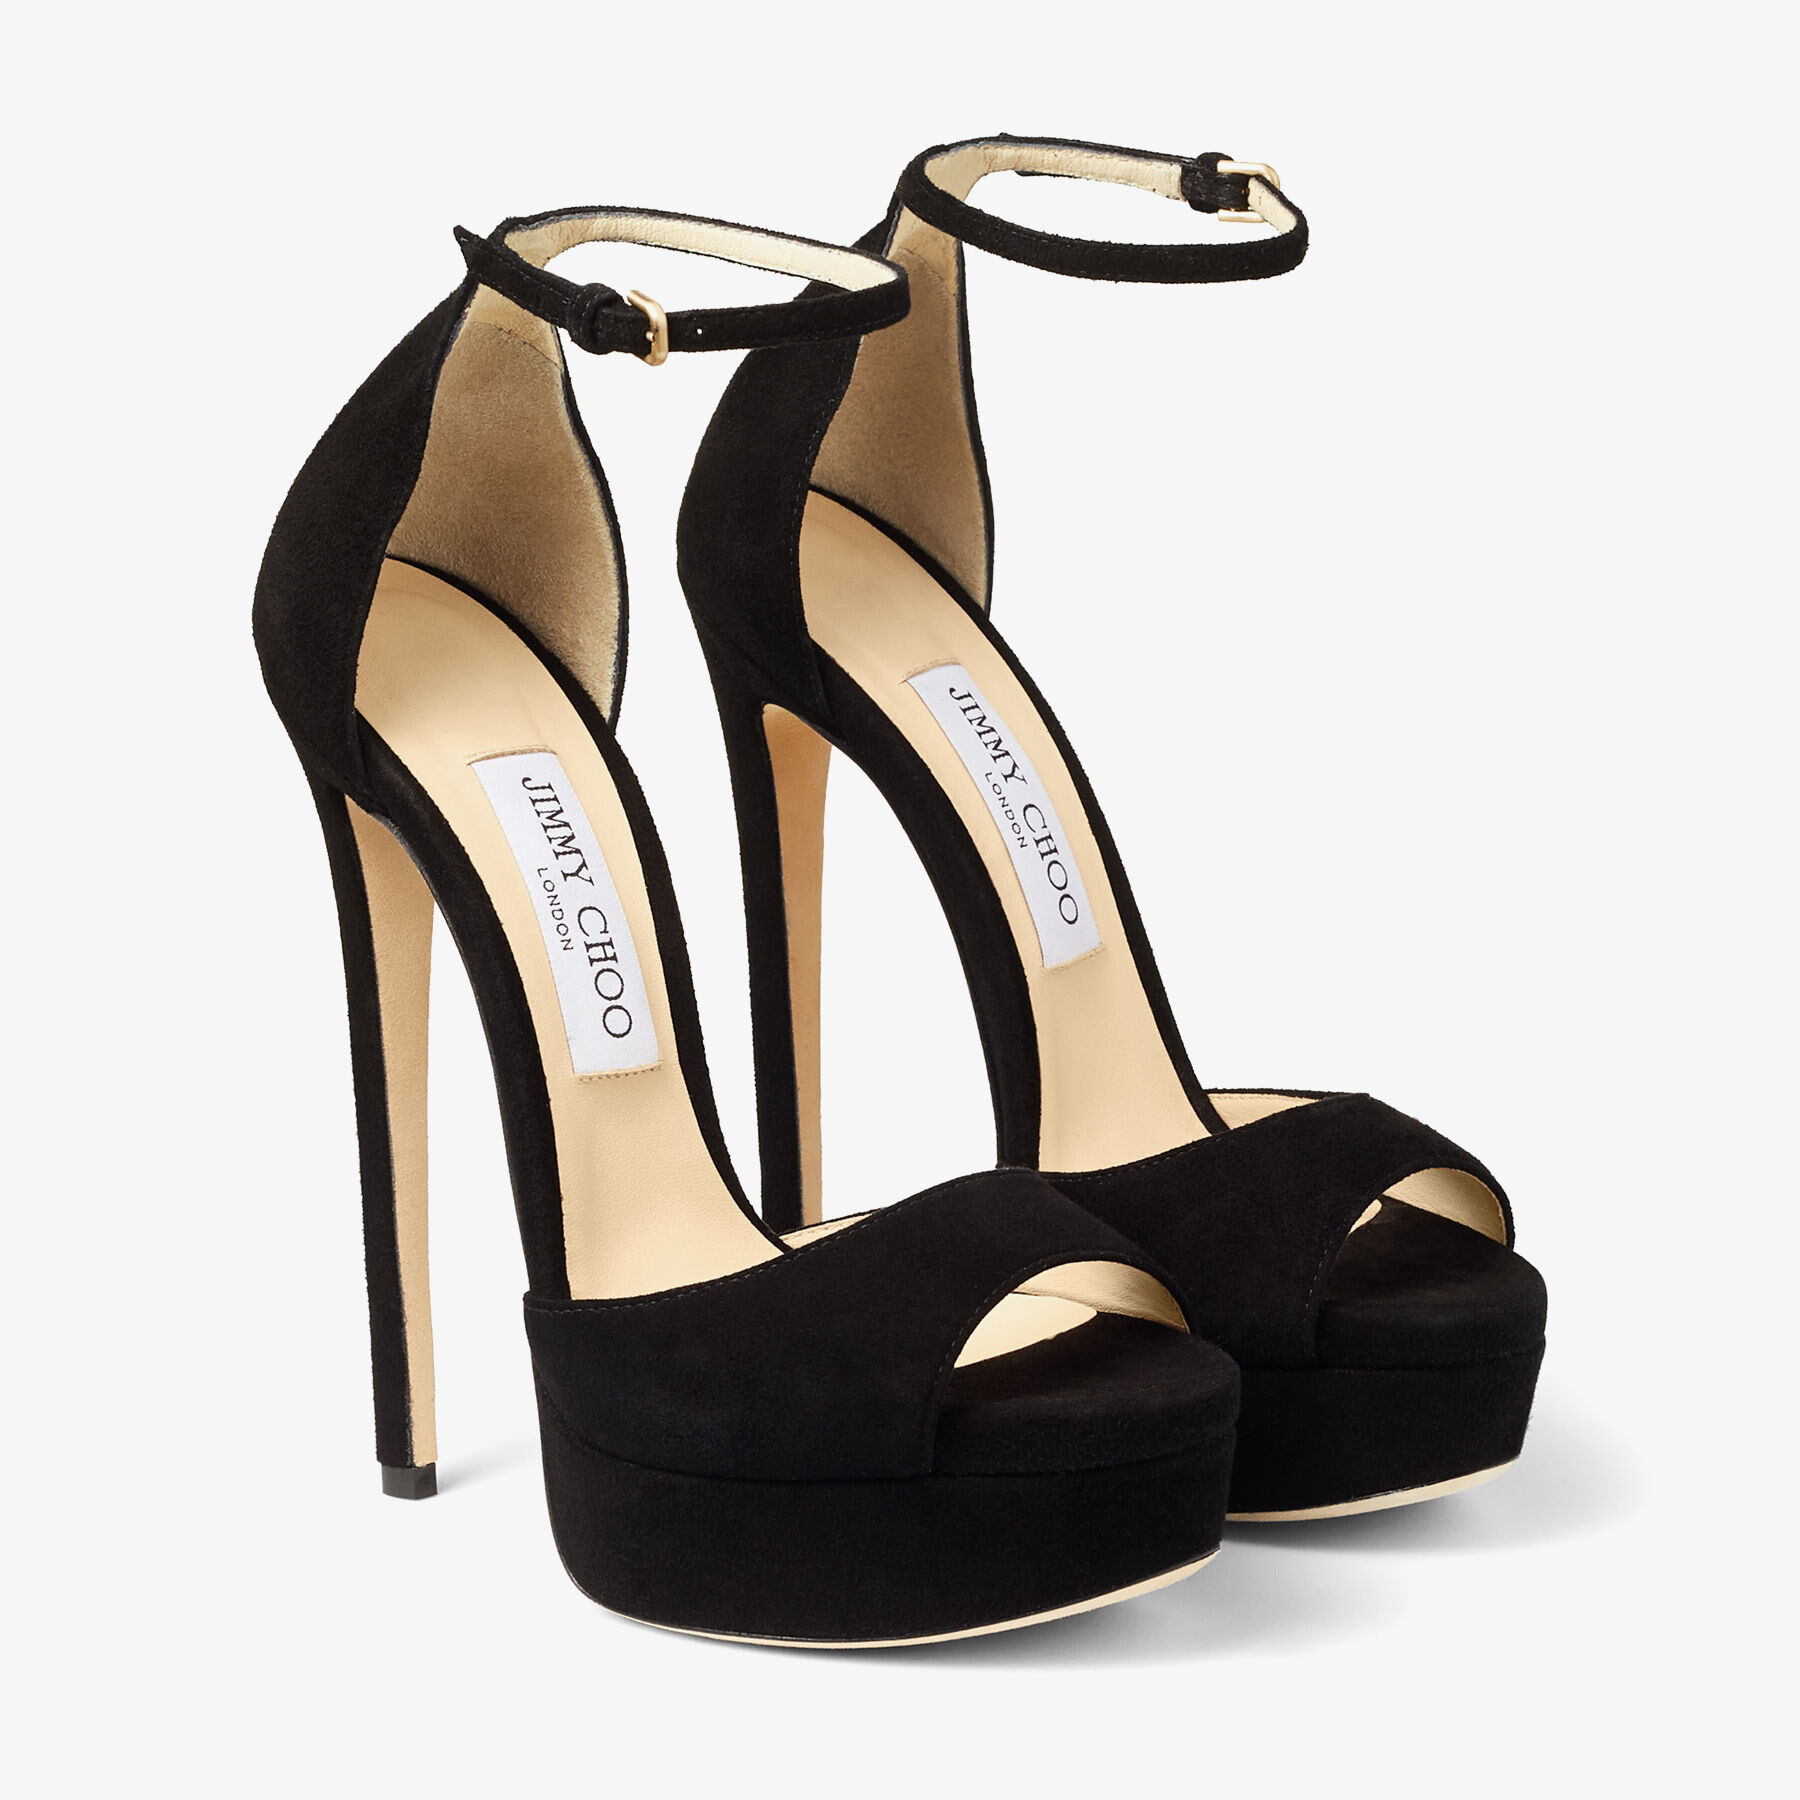 JIMMY CHOO: Shoes woman - Gold | JIMMY CHOO heeled sandals AZIA95GLE online  at GIGLIO.COM